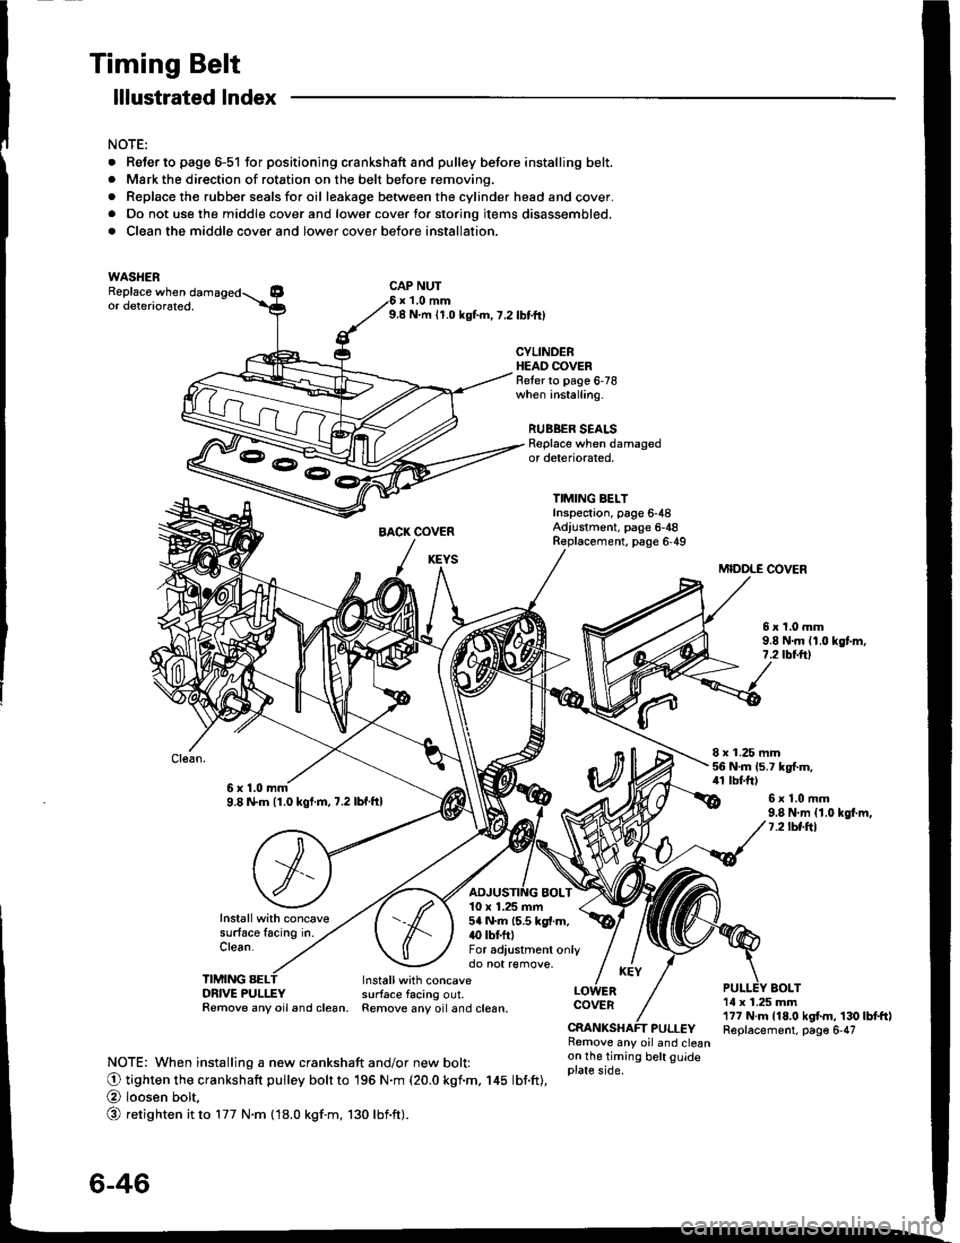 HONDA INTEGRA 1994 4.G Workshop Manual Timing Belt
. ReJerto page 6-51 for positioning crankshaft and pulley before installing belt.. Mark the direction of rotation on the belt before removing.
. Replace the rubber seals for oil leakage be